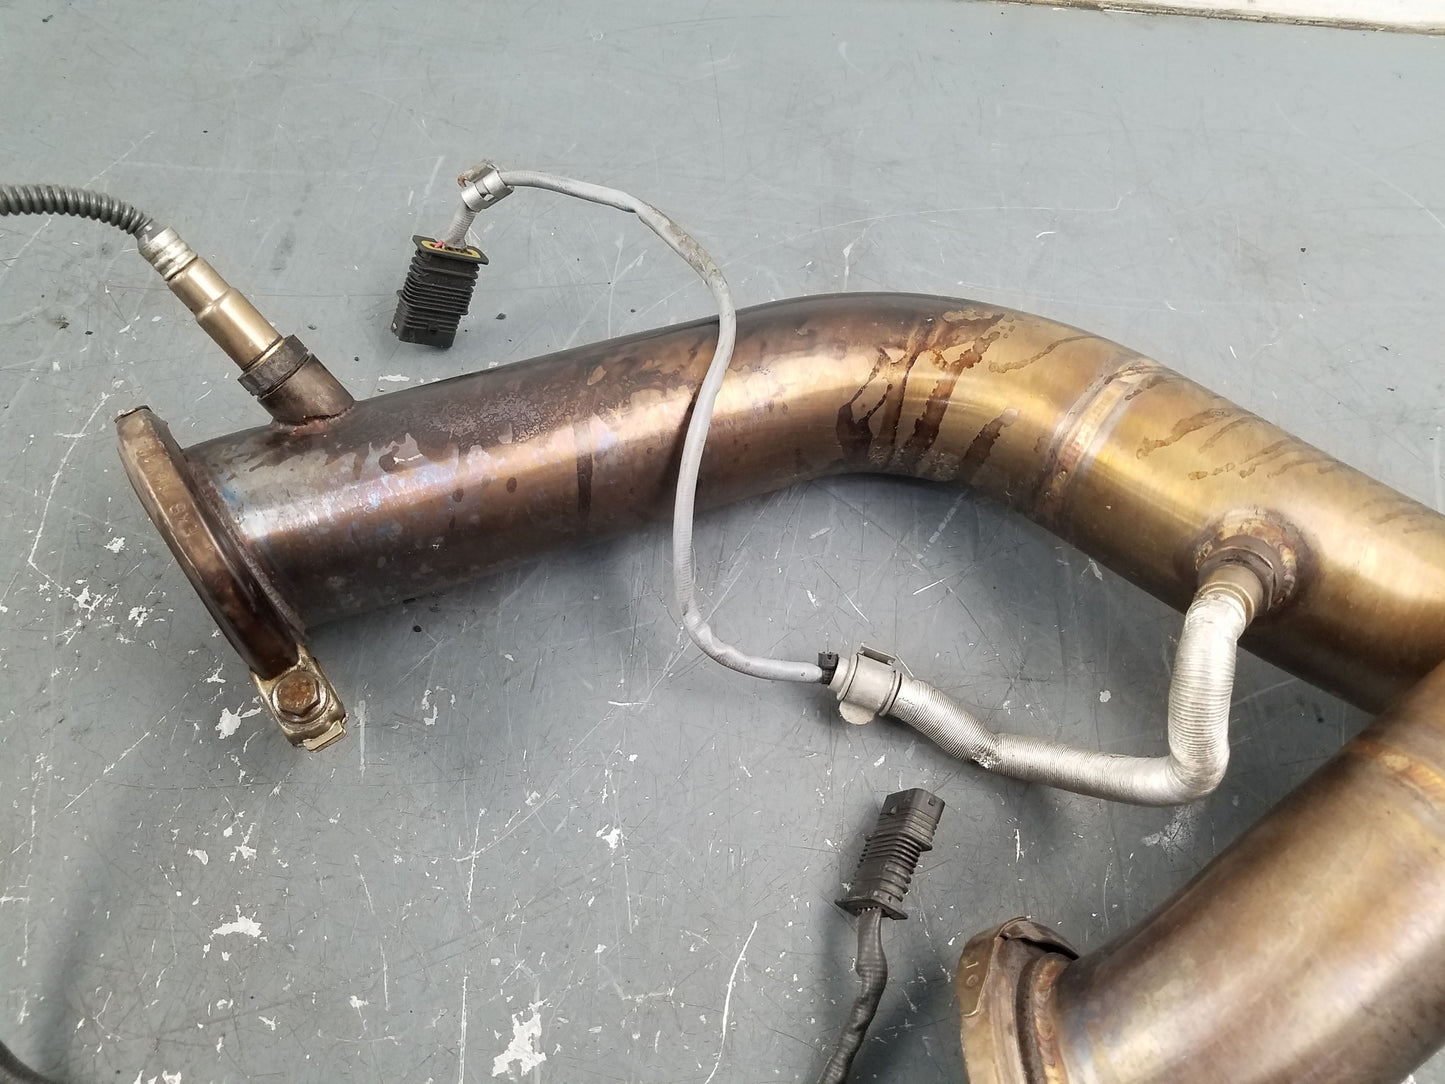 2017 BMW M4 F82 CATless Downpipes #9136 A6